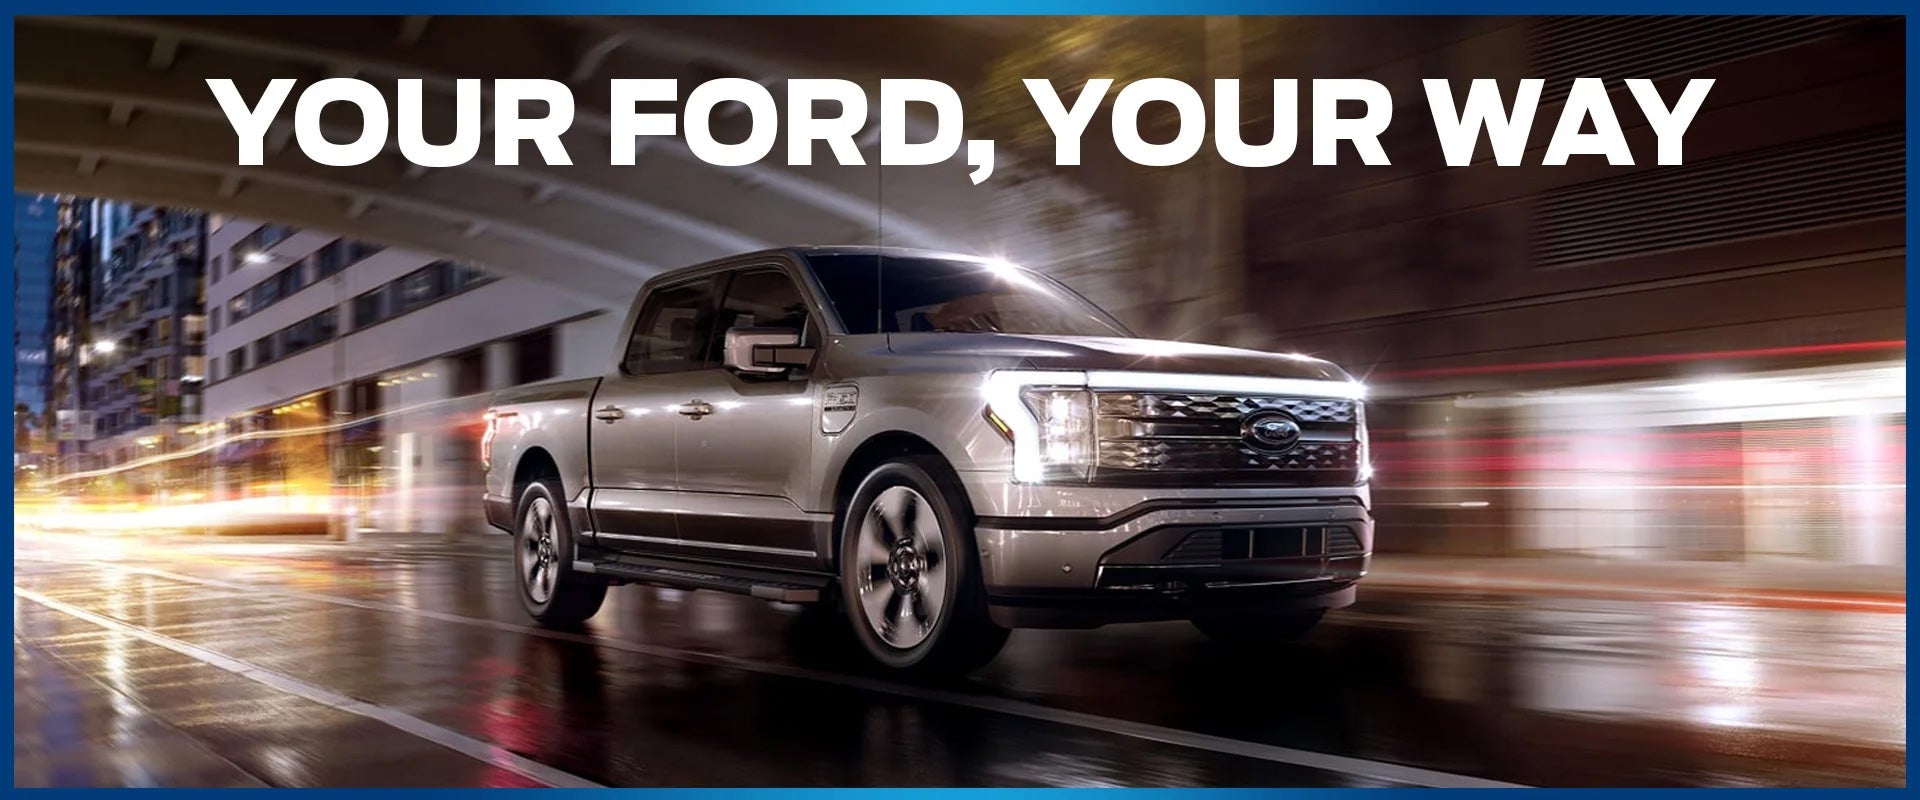 Your Ford, Your Way